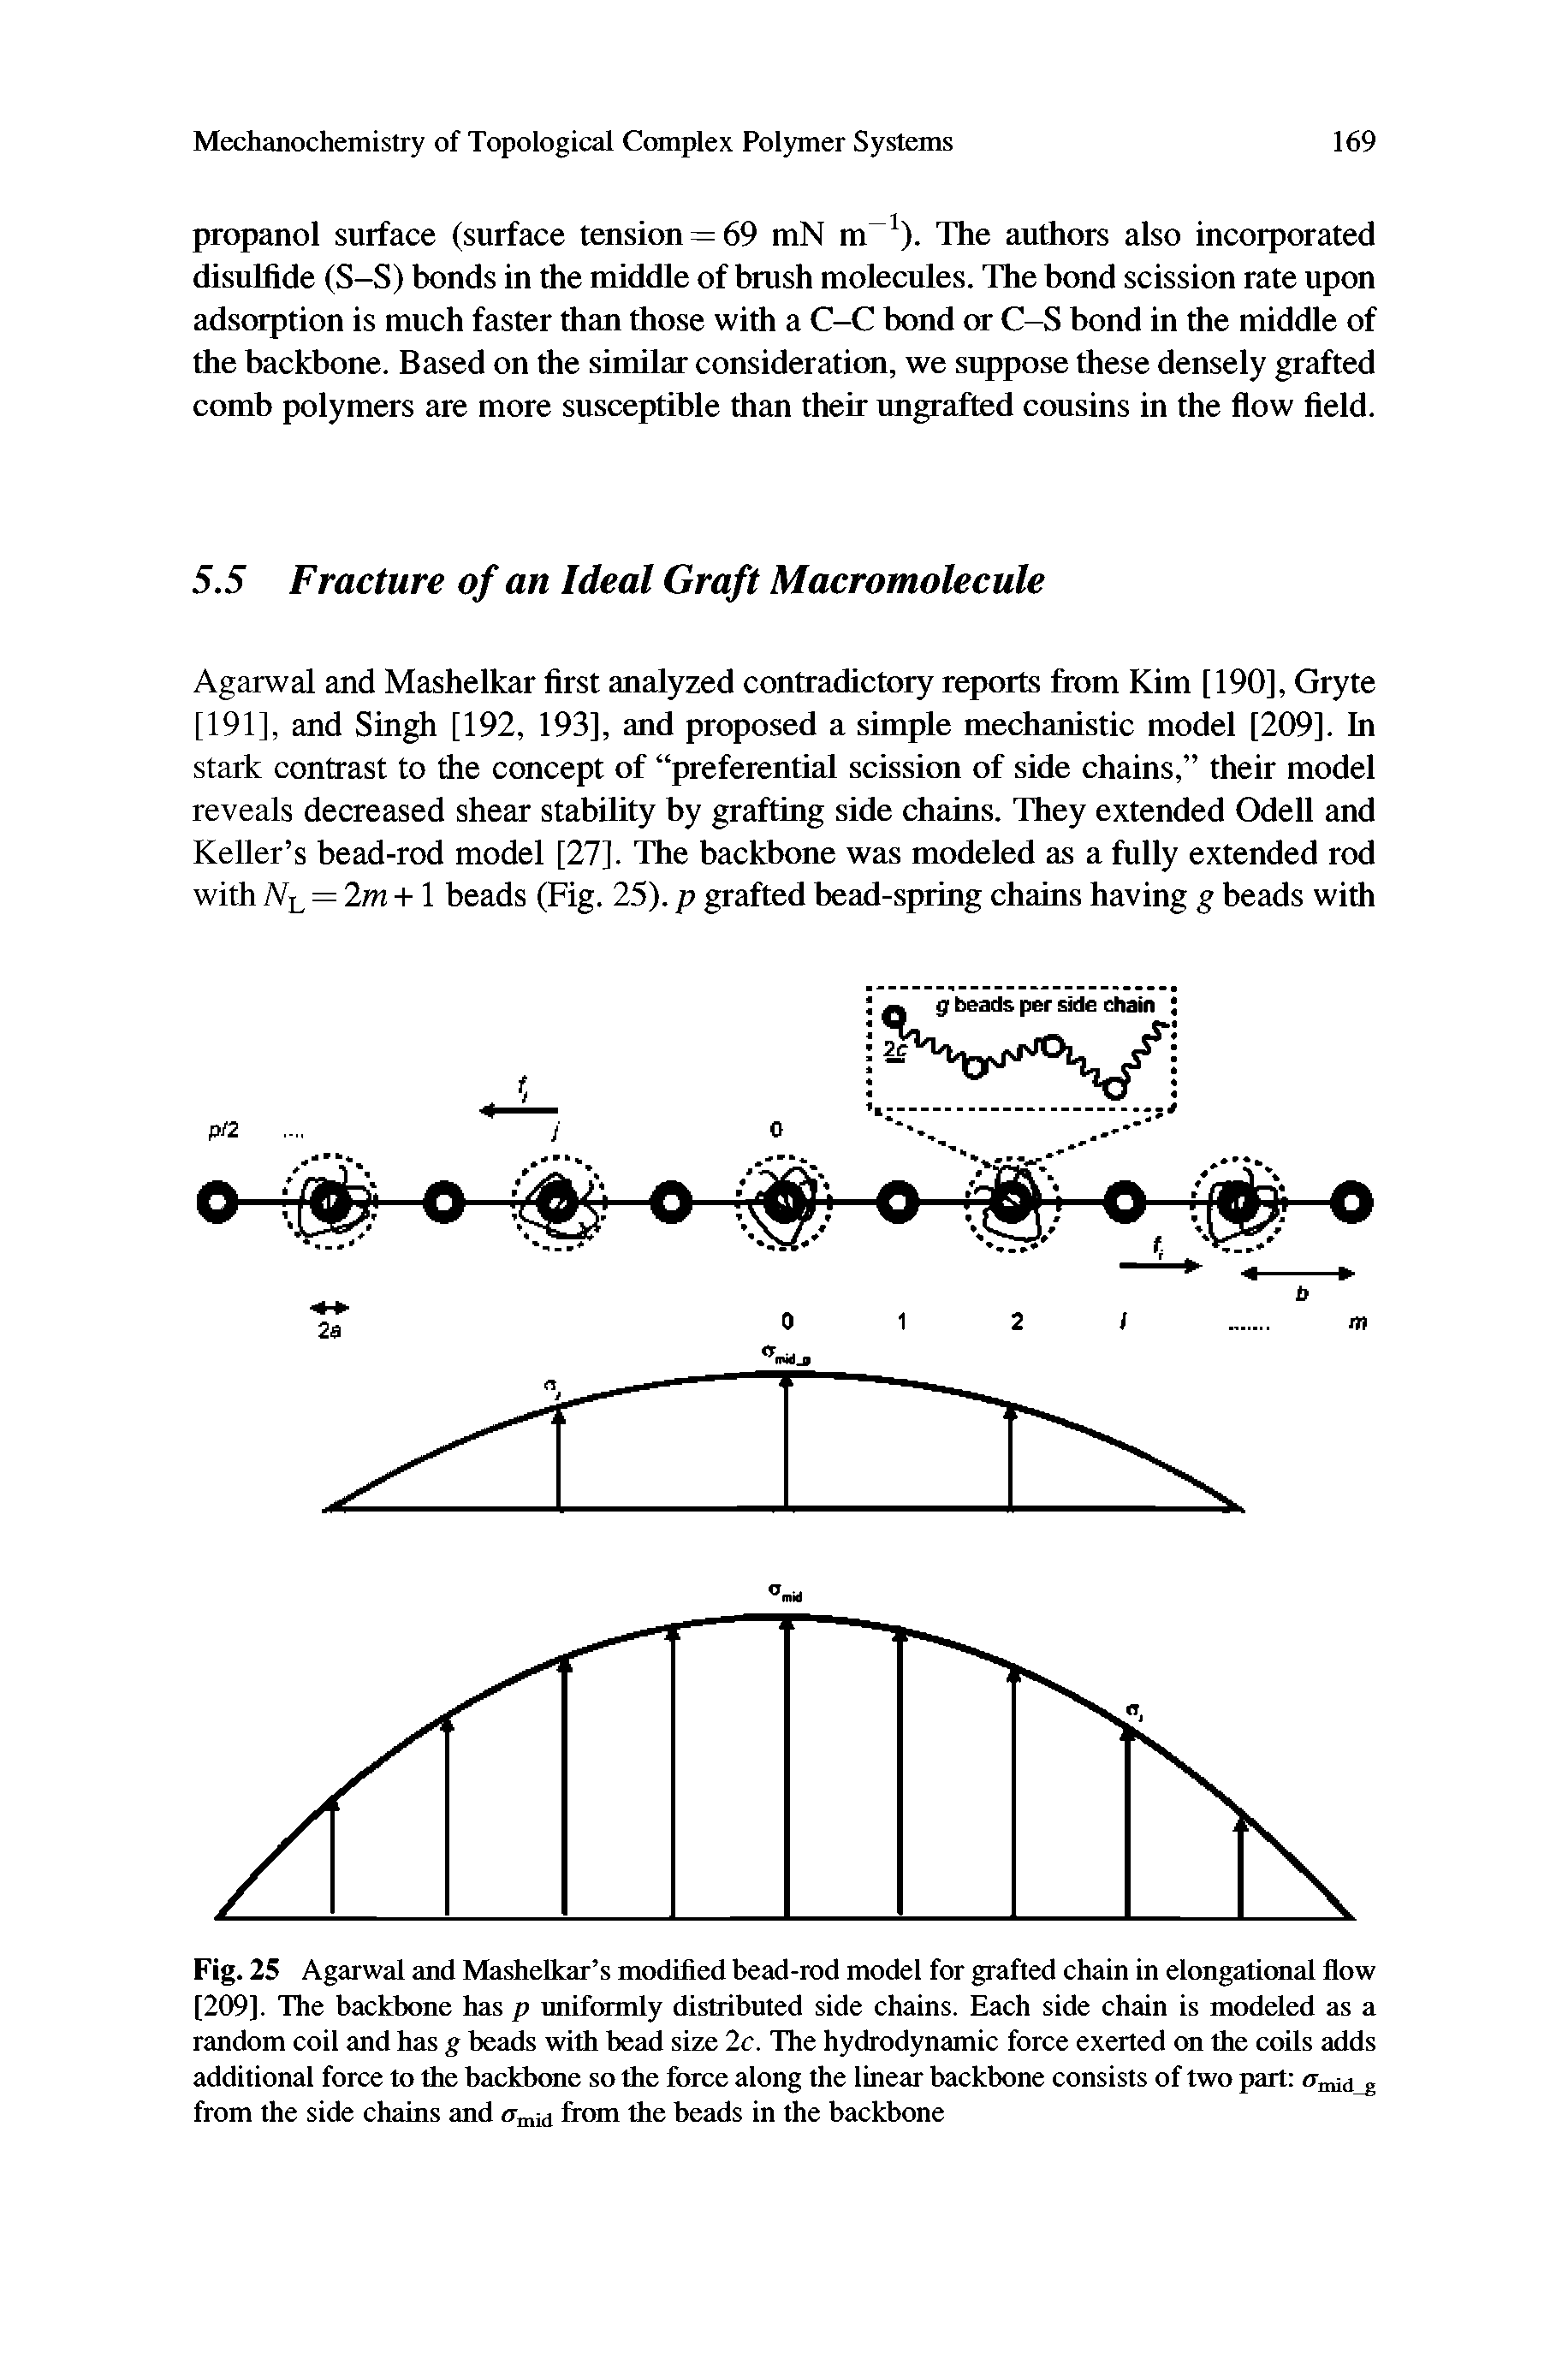 Fig. 25 Agarwal and Mashelkar s modified bead-rod model for grafted chain in elongational flow [209]. The backbone has p uniformly distributed side chains. Each side chain is modeled as a random coil and has g beads with bead size 2c. The hydrodynamic force exerted on the coils adds additional force to the backbone so the force along the linear backbone consists of two part <Tniid g from the side chains and Uniid from the beads in the backbone...